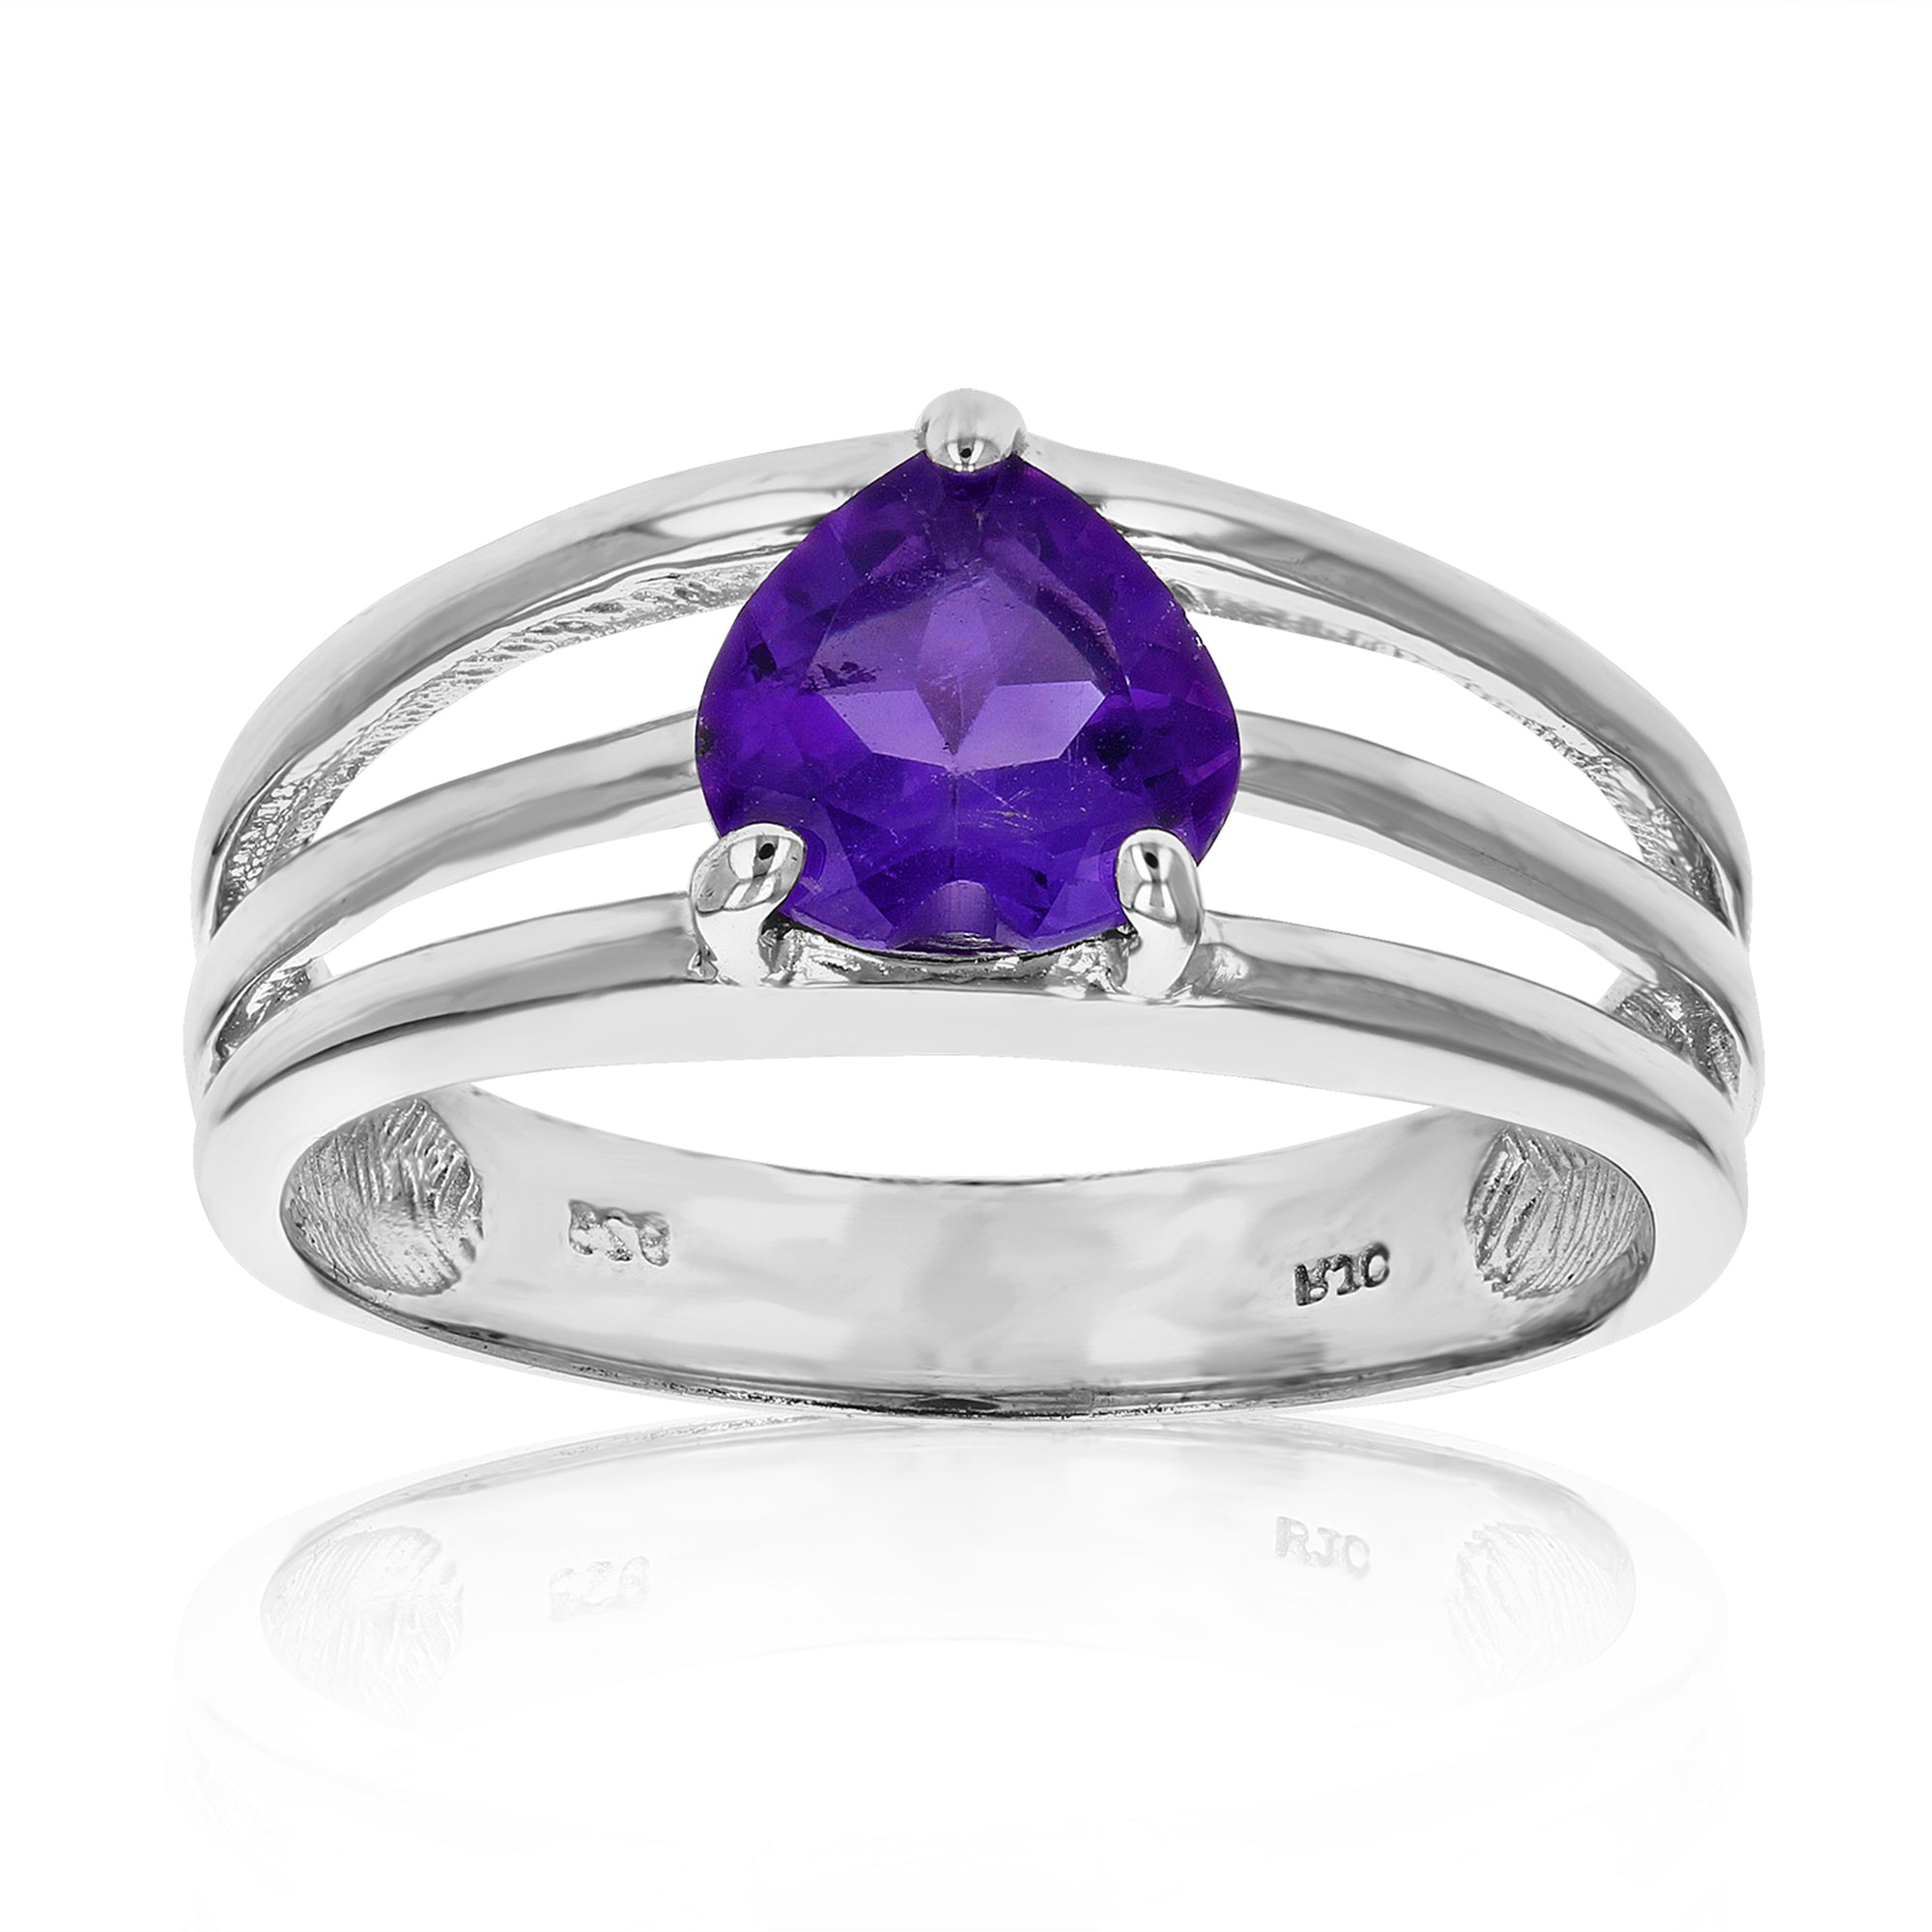 1 cttw Purple Amethyst Heart Ring .925 Sterling Silver with Rhodium Plating 7 MM